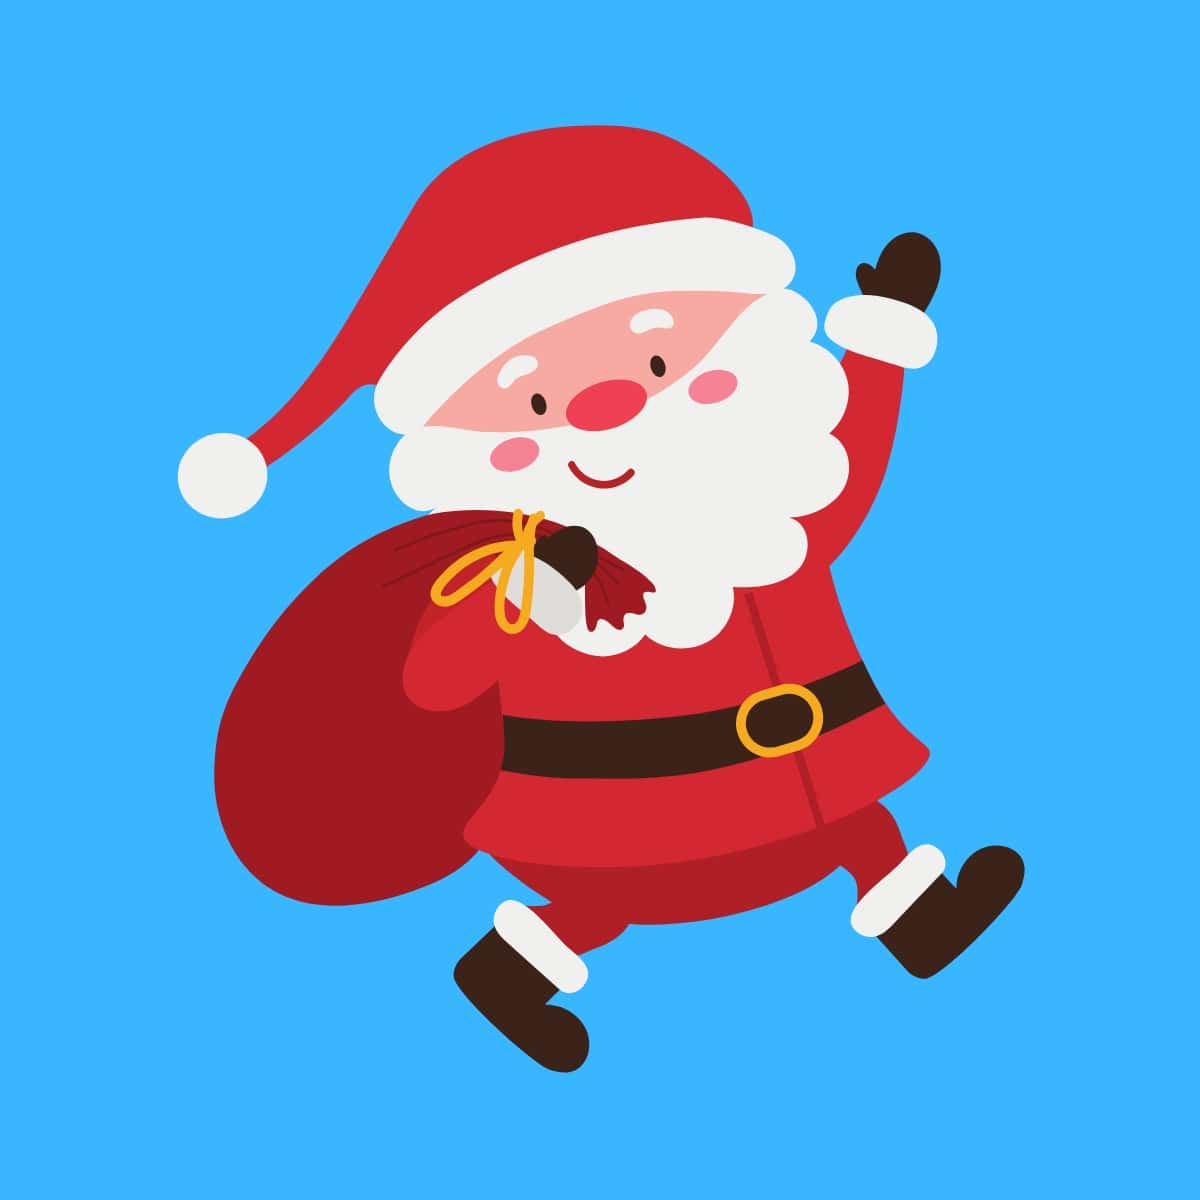 Cartoon graphic of Santa waving with a sack of toys on a blue background.